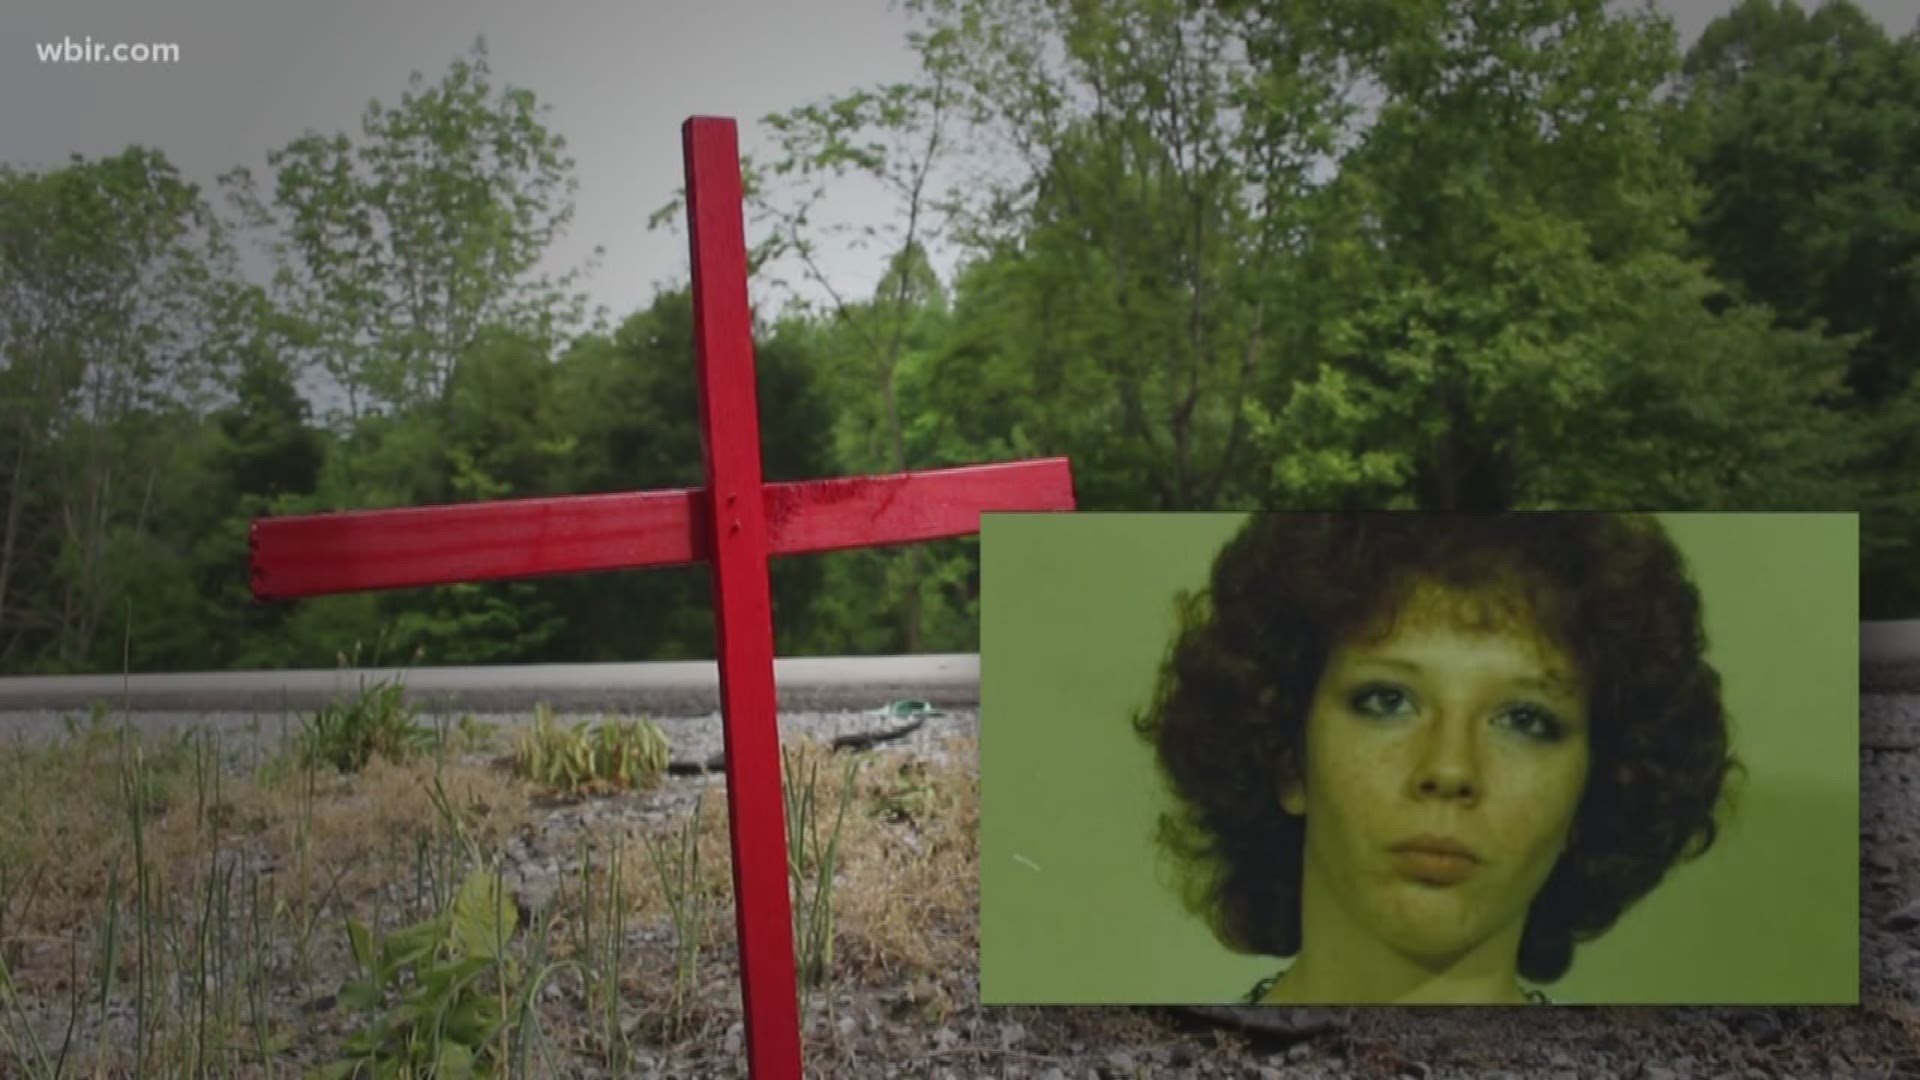 Redhead Murders investigation 'hot' after Campbell Co. Jane Doe i...